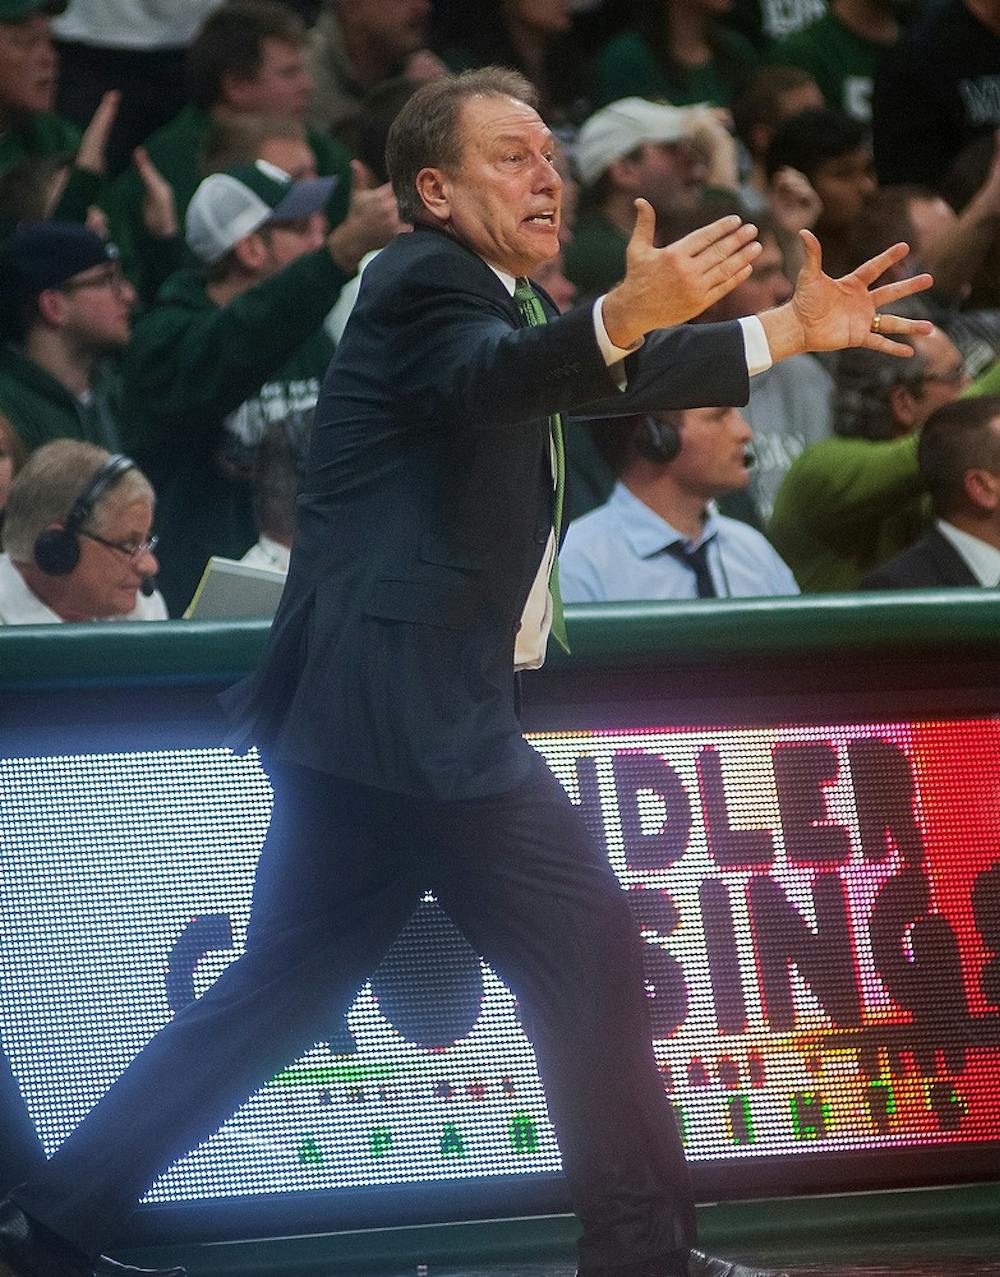 <p>Head coach Tom Izzo reacts to a play during the game against Maryland on Dec. 30, 2014, at Breslin Center. The Spartans were defeated by the Terrapins, 68-66 in double overtime. Danyelle Morrow/The State News</p>